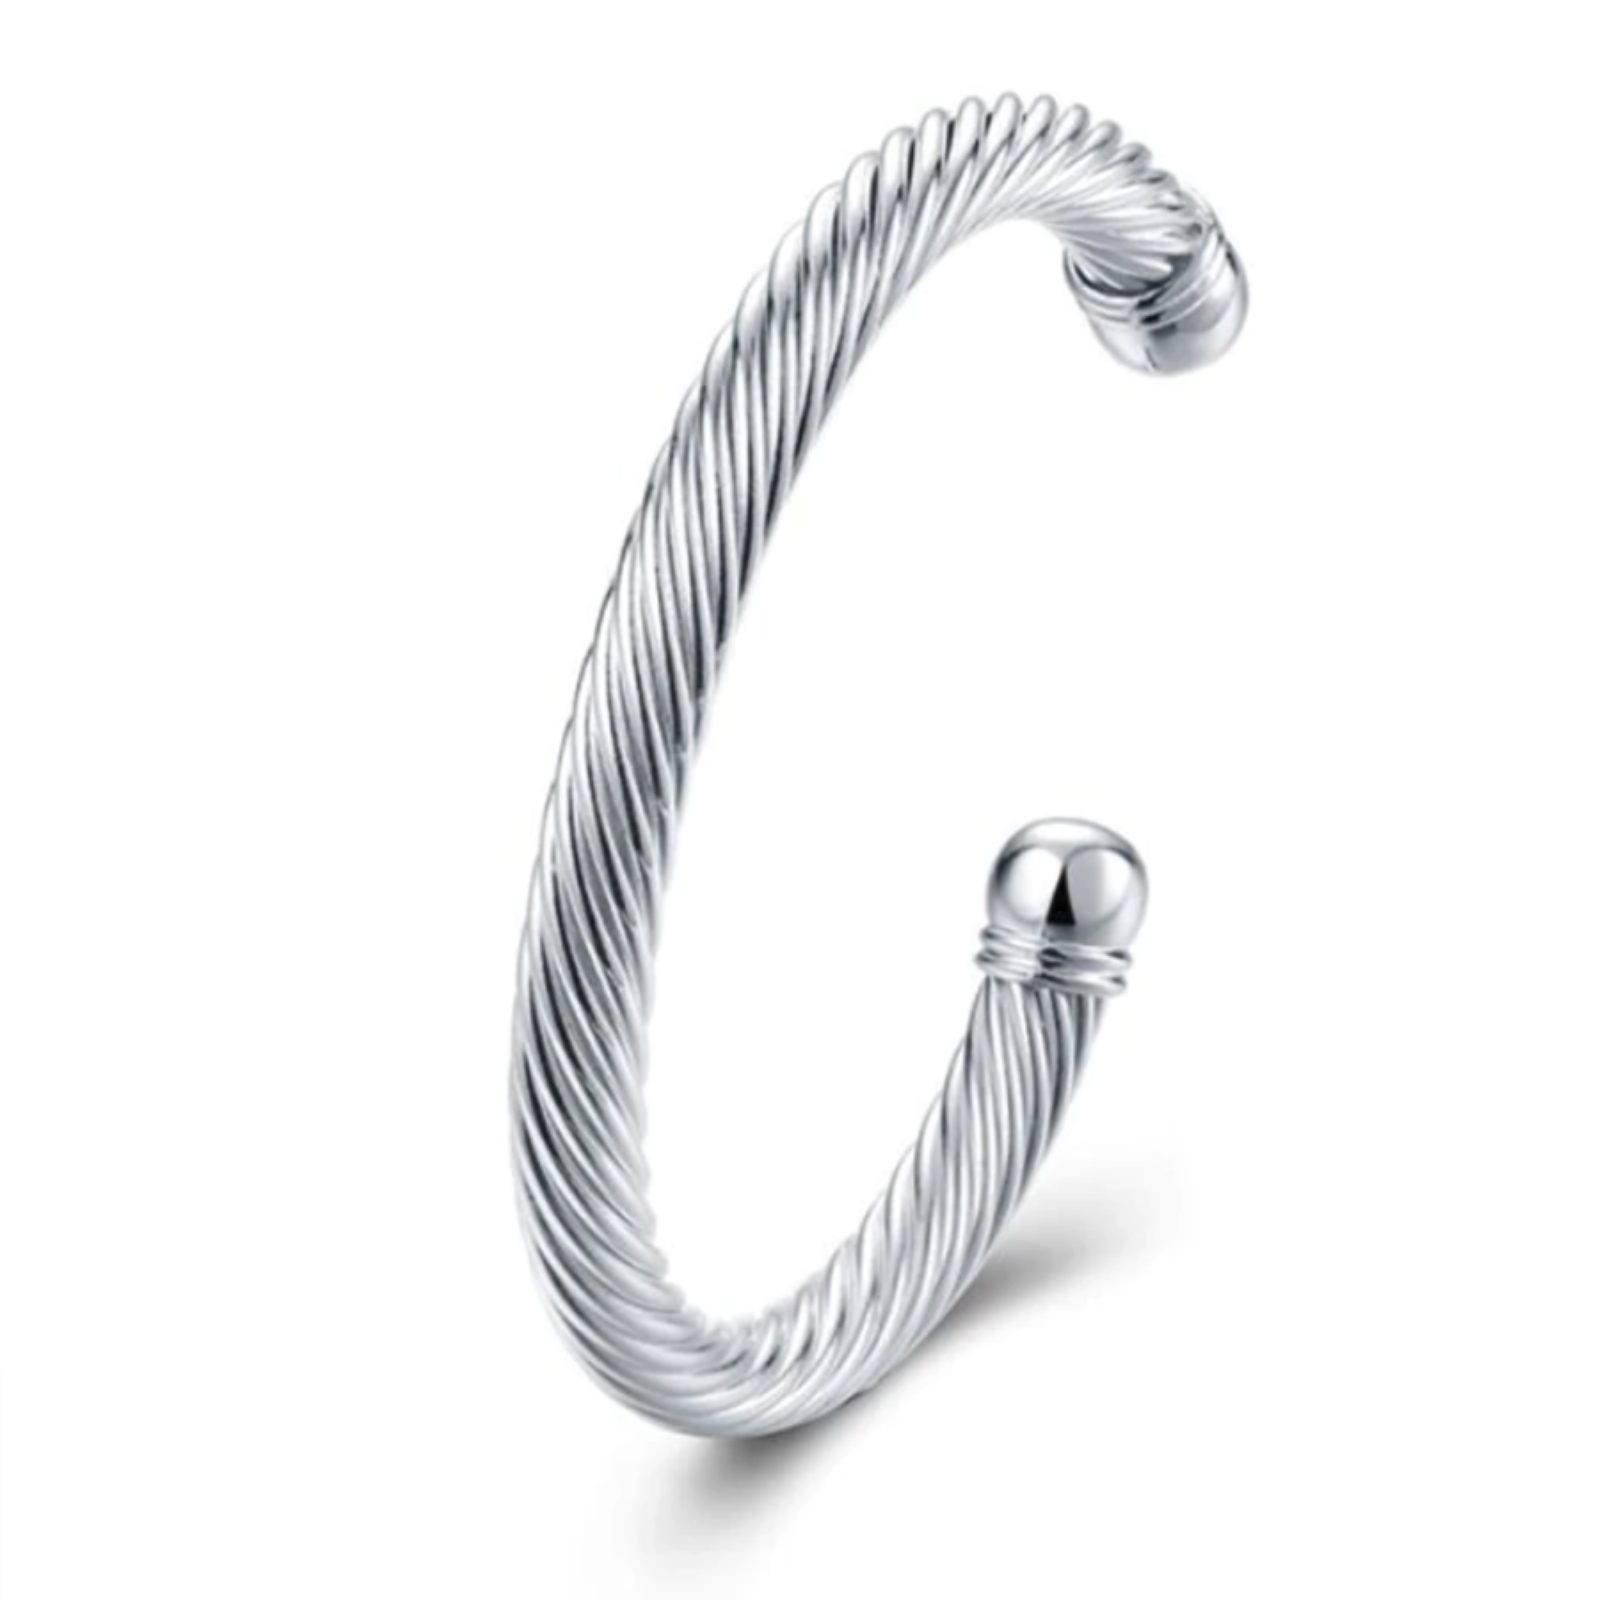 Thick Twisted Bangle Bracelet 925 Sterling Silver NEW